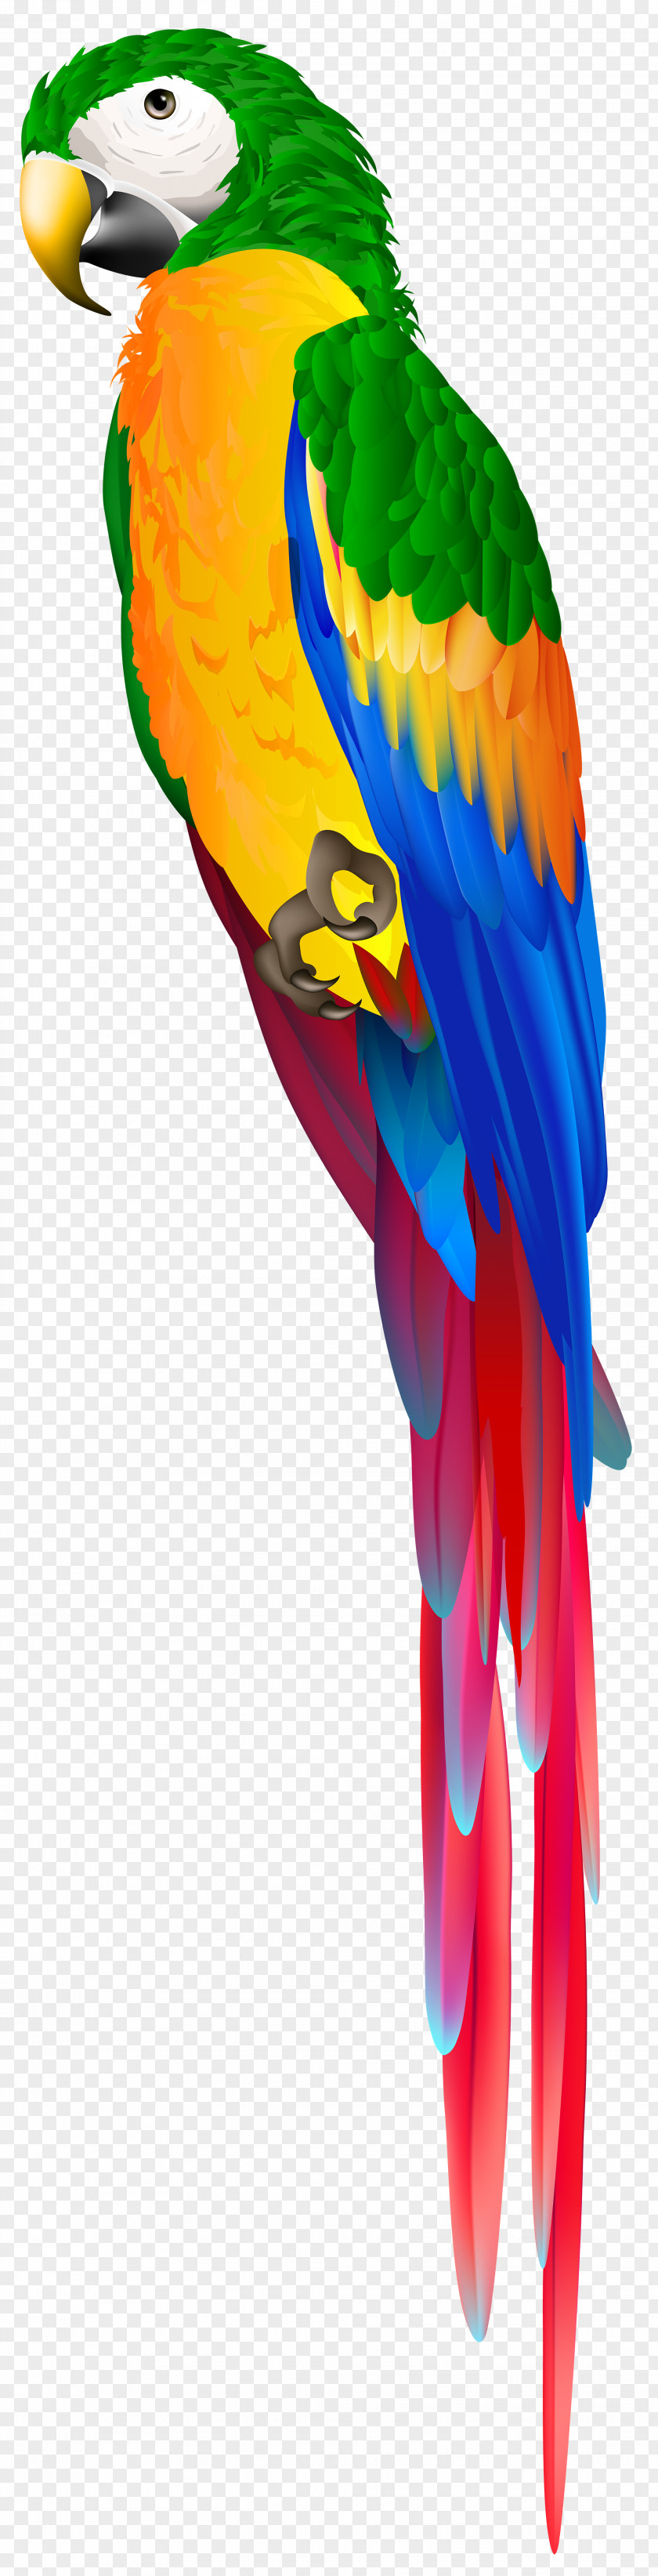 Costume Wing Bird Parrot PNG